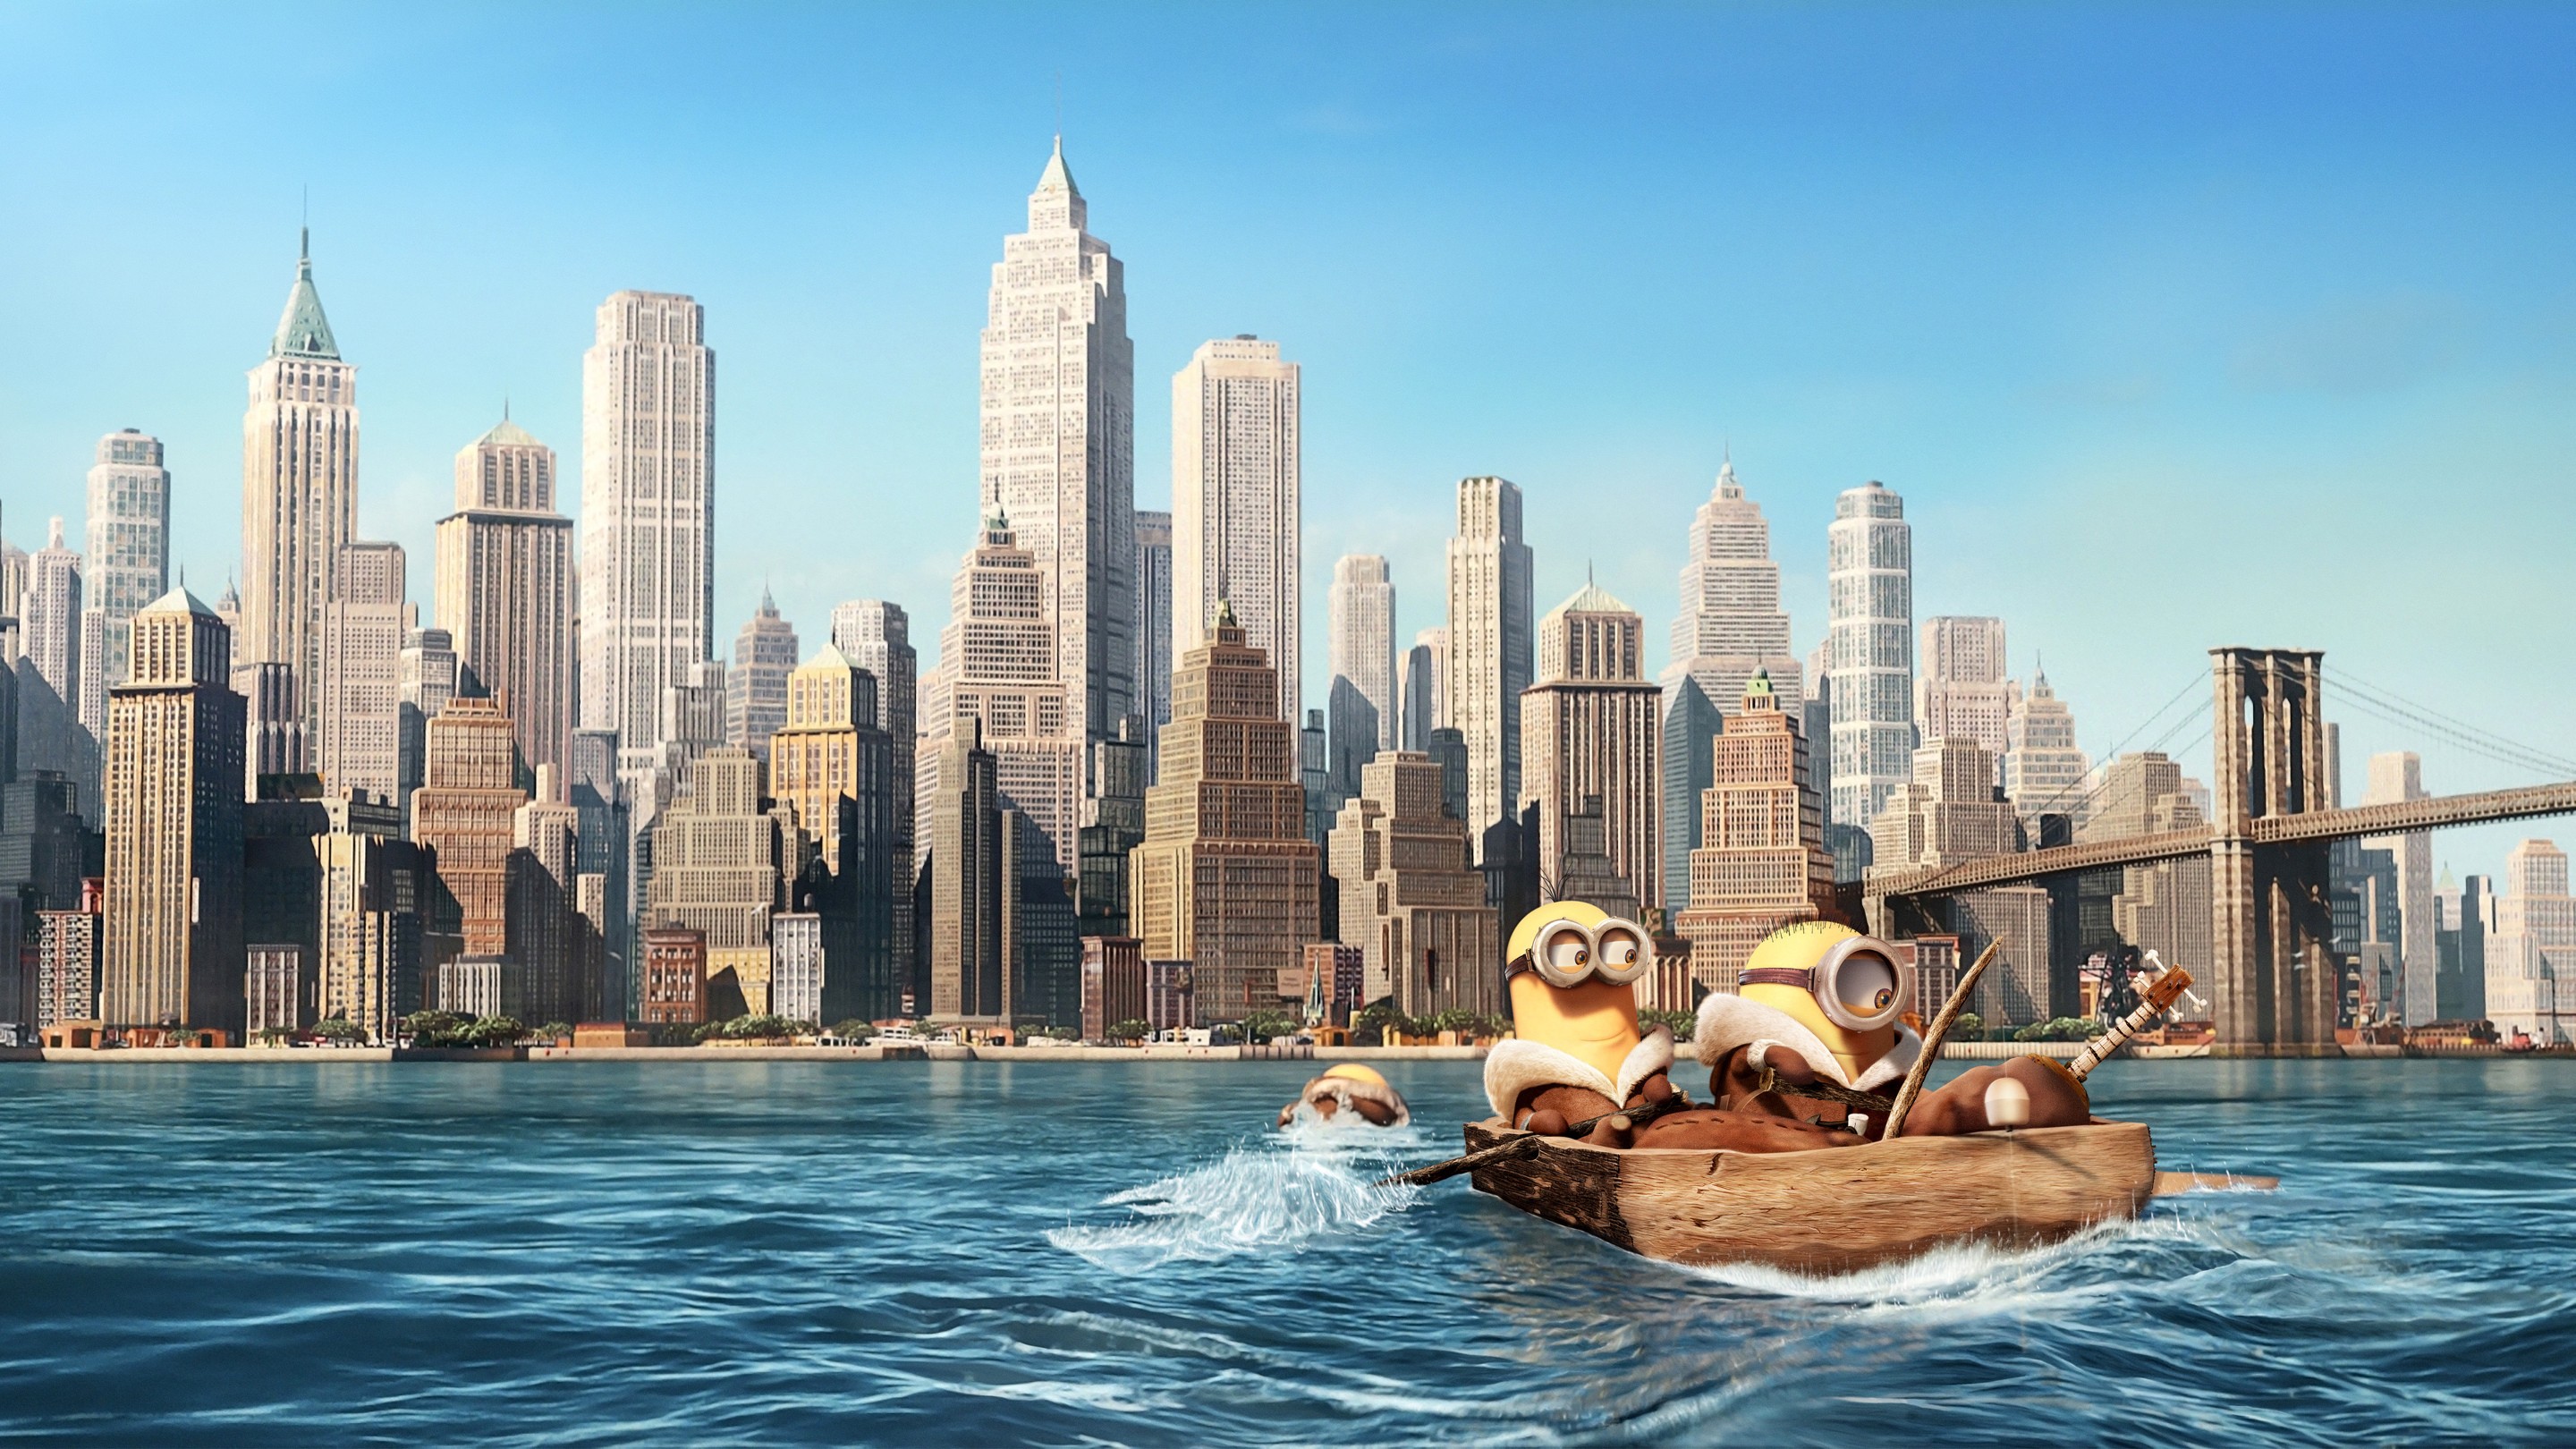 General 2880x1620 minions humor cityscape water boat movies animated movies digital art